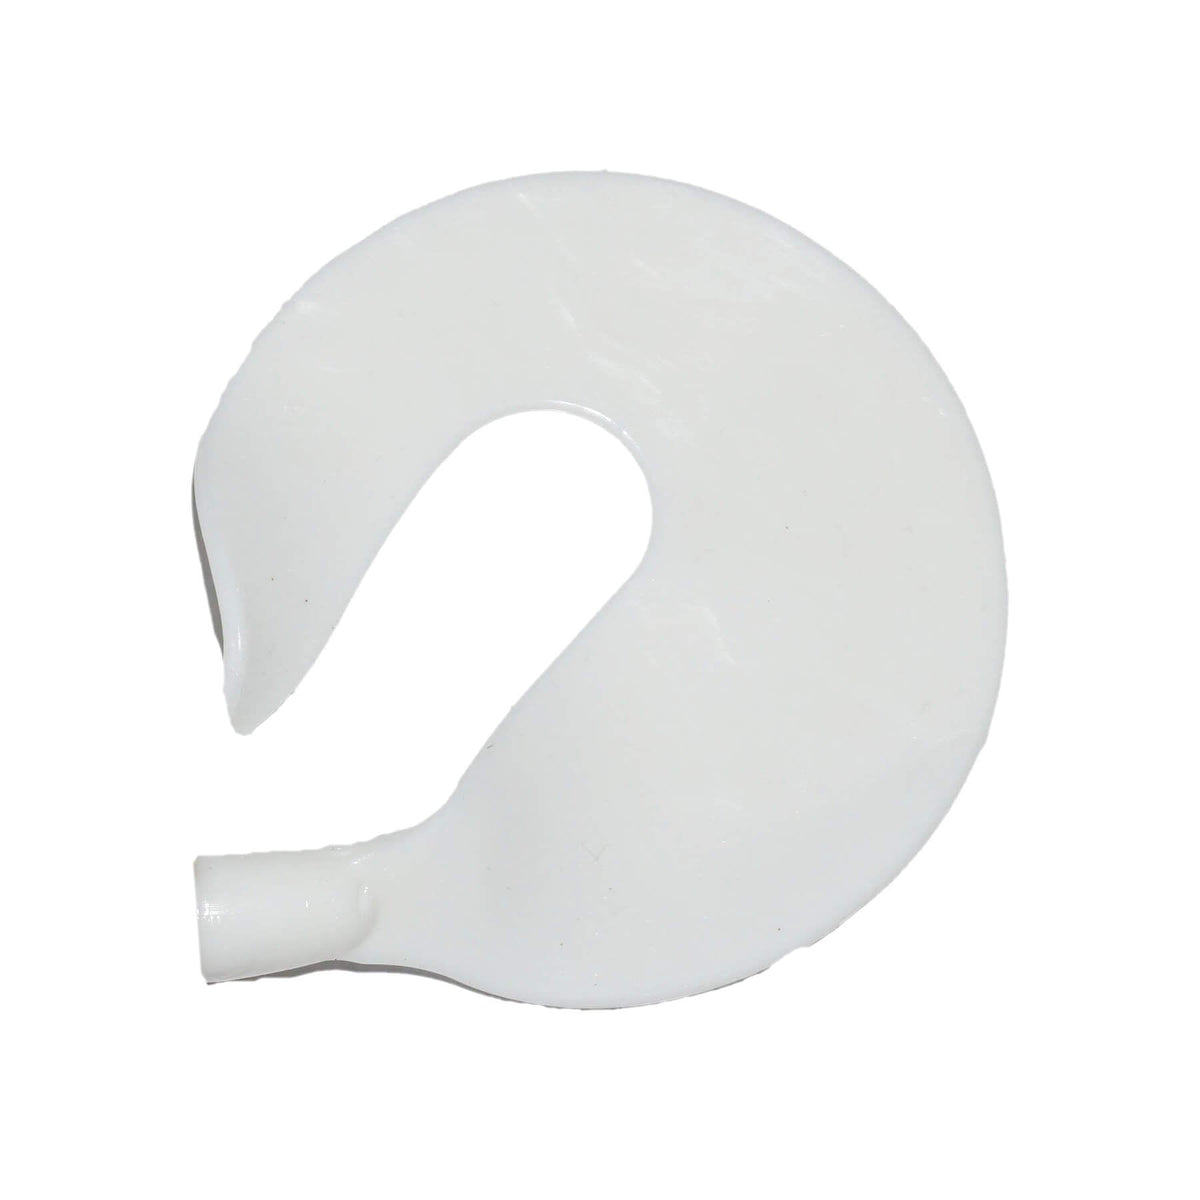 View of Lures_Add-on Whale Tail Plastics 11" Replacement Tail White available at EZOKO Pike and Musky Shop